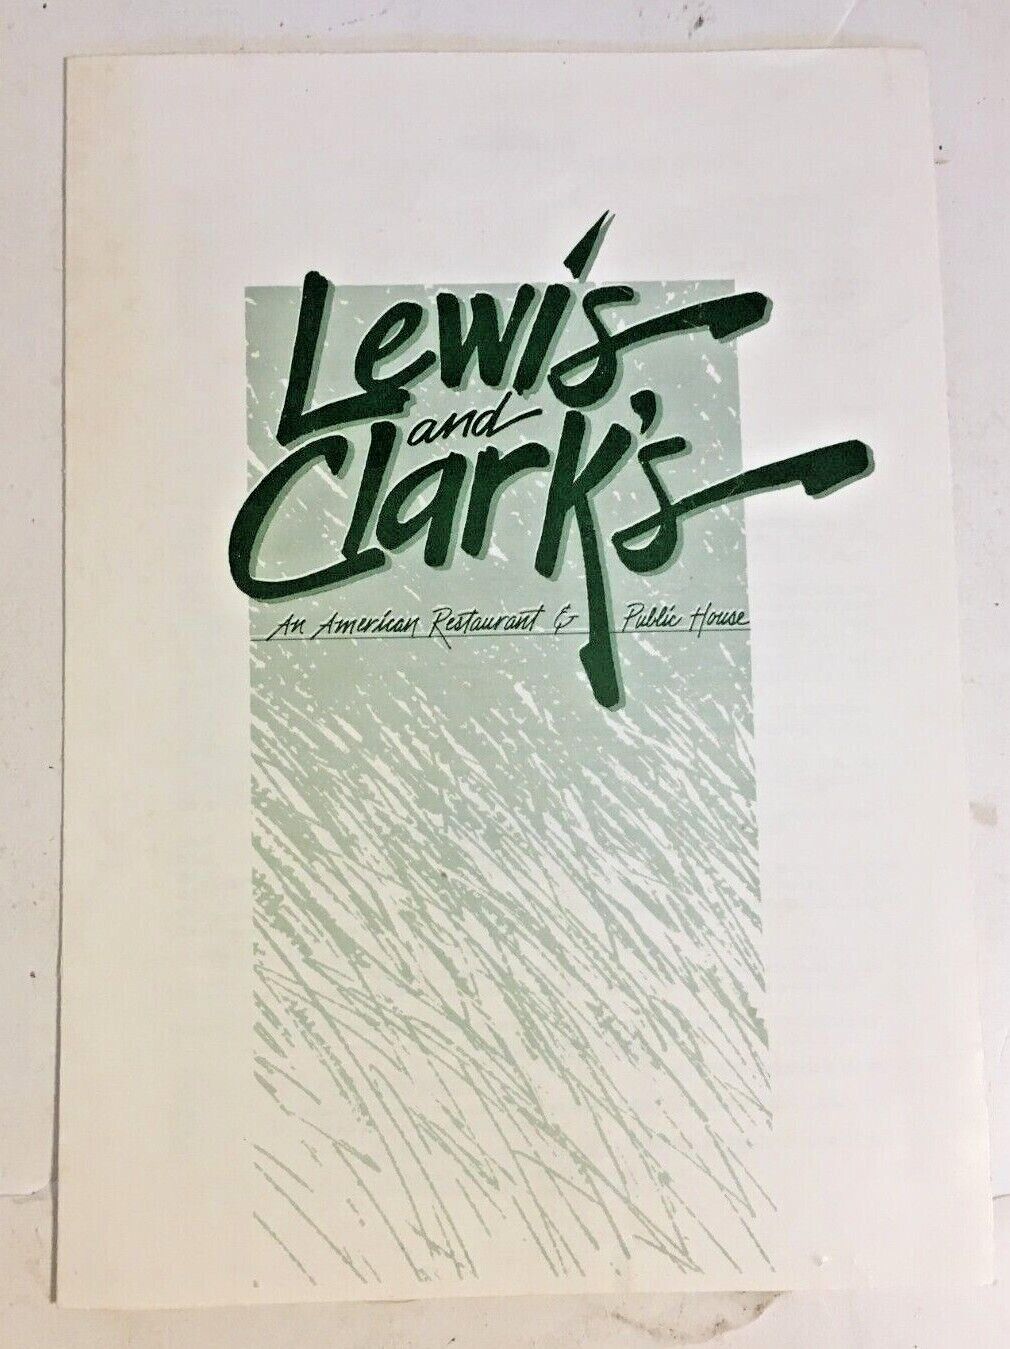 Vtg Restaurant Menu Lewis and Clark\'s An American Restaurant and Public House